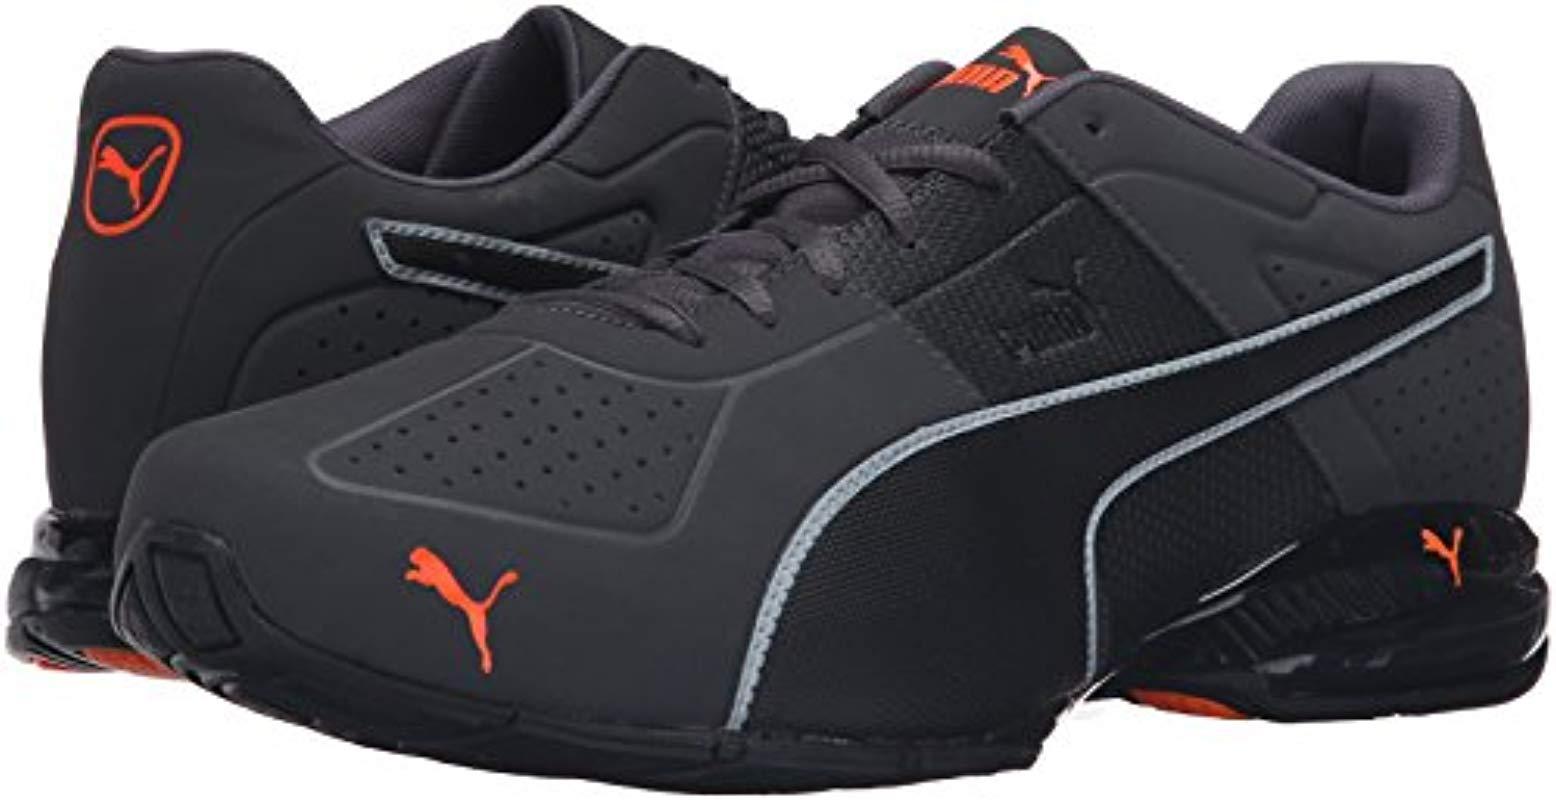 PUMA Cell Cross Trainer in Black (Red) for Men - Save 51% - Lyst